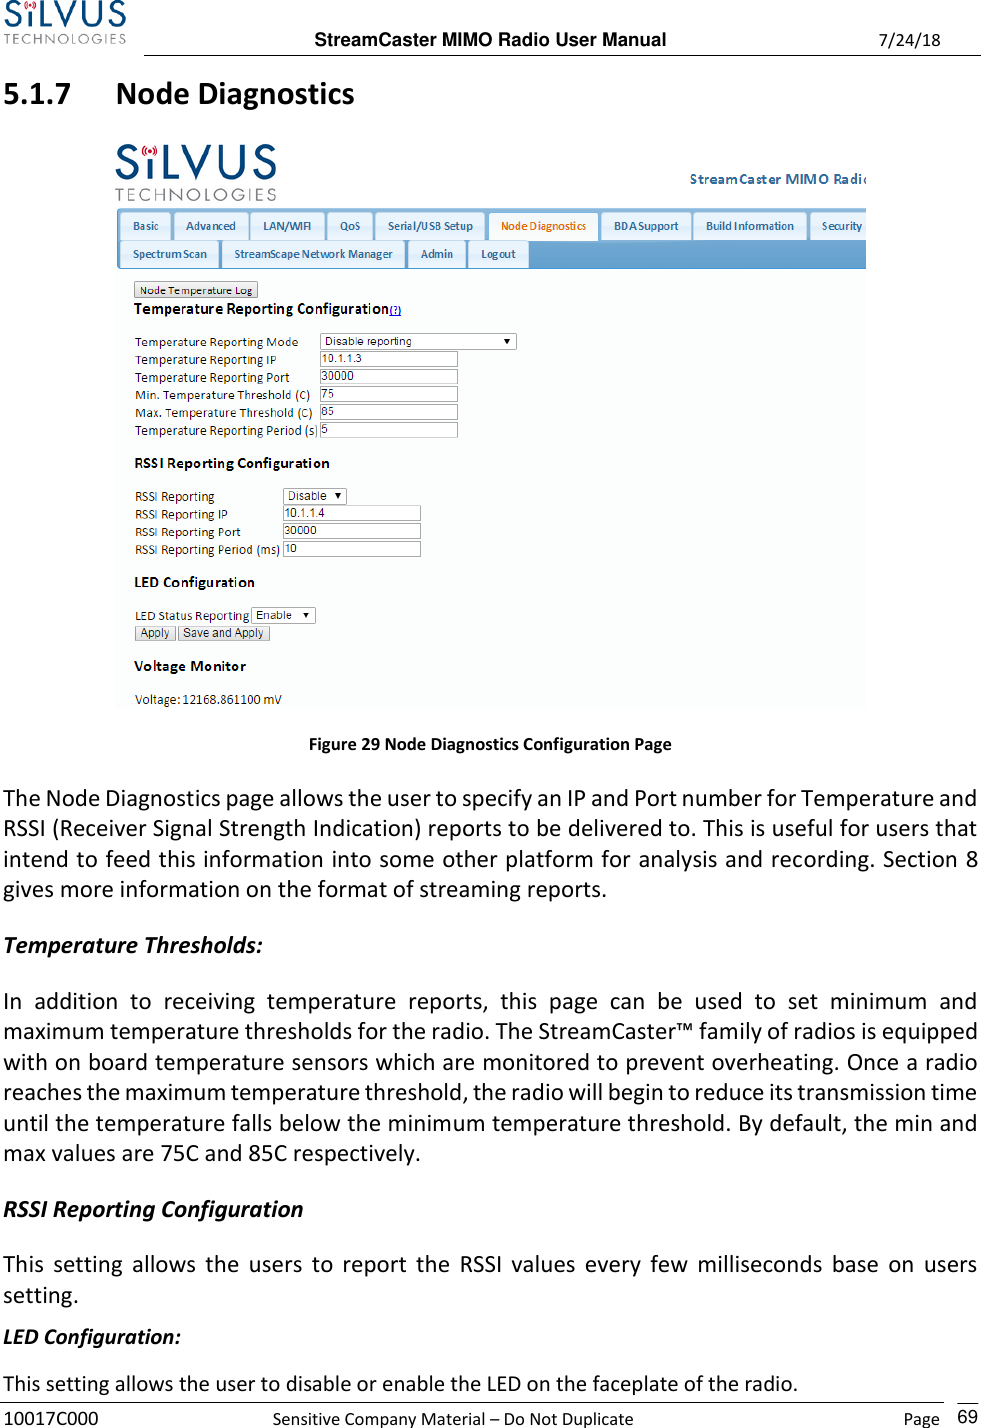  StreamCaster MIMO Radio User Manual  7/24/18 10017C000  Sensitive Company Material – Do Not Duplicate    Page    69 5.1.7 Node Diagnostics  Figure 29 Node Diagnostics Configuration Page The Node Diagnostics page allows the user to specify an IP and Port number for Temperature and RSSI (Receiver Signal Strength Indication) reports to be delivered to. This is useful for users that intend to feed this information into some other platform for analysis and recording. Section 8 gives more information on the format of streaming reports.  Temperature Thresholds: In  addition  to  receiving  temperature  reports,  this  page  can  be  used  to  set  minimum  and maximum temperature thresholds for the radio. The StreamCaster™ family of radios is equipped with on board temperature sensors which are monitored to prevent overheating. Once a radio reaches the maximum temperature threshold, the radio will begin to reduce its transmission time until the temperature falls below the minimum temperature threshold. By default, the min and max values are 75C and 85C respectively. RSSI Reporting Configuration This  setting  allows the  users  to report the  RSSI  values every few  milliseconds  base  on users setting. LED Configuration: This setting allows the user to disable or enable the LED on the faceplate of the radio. 